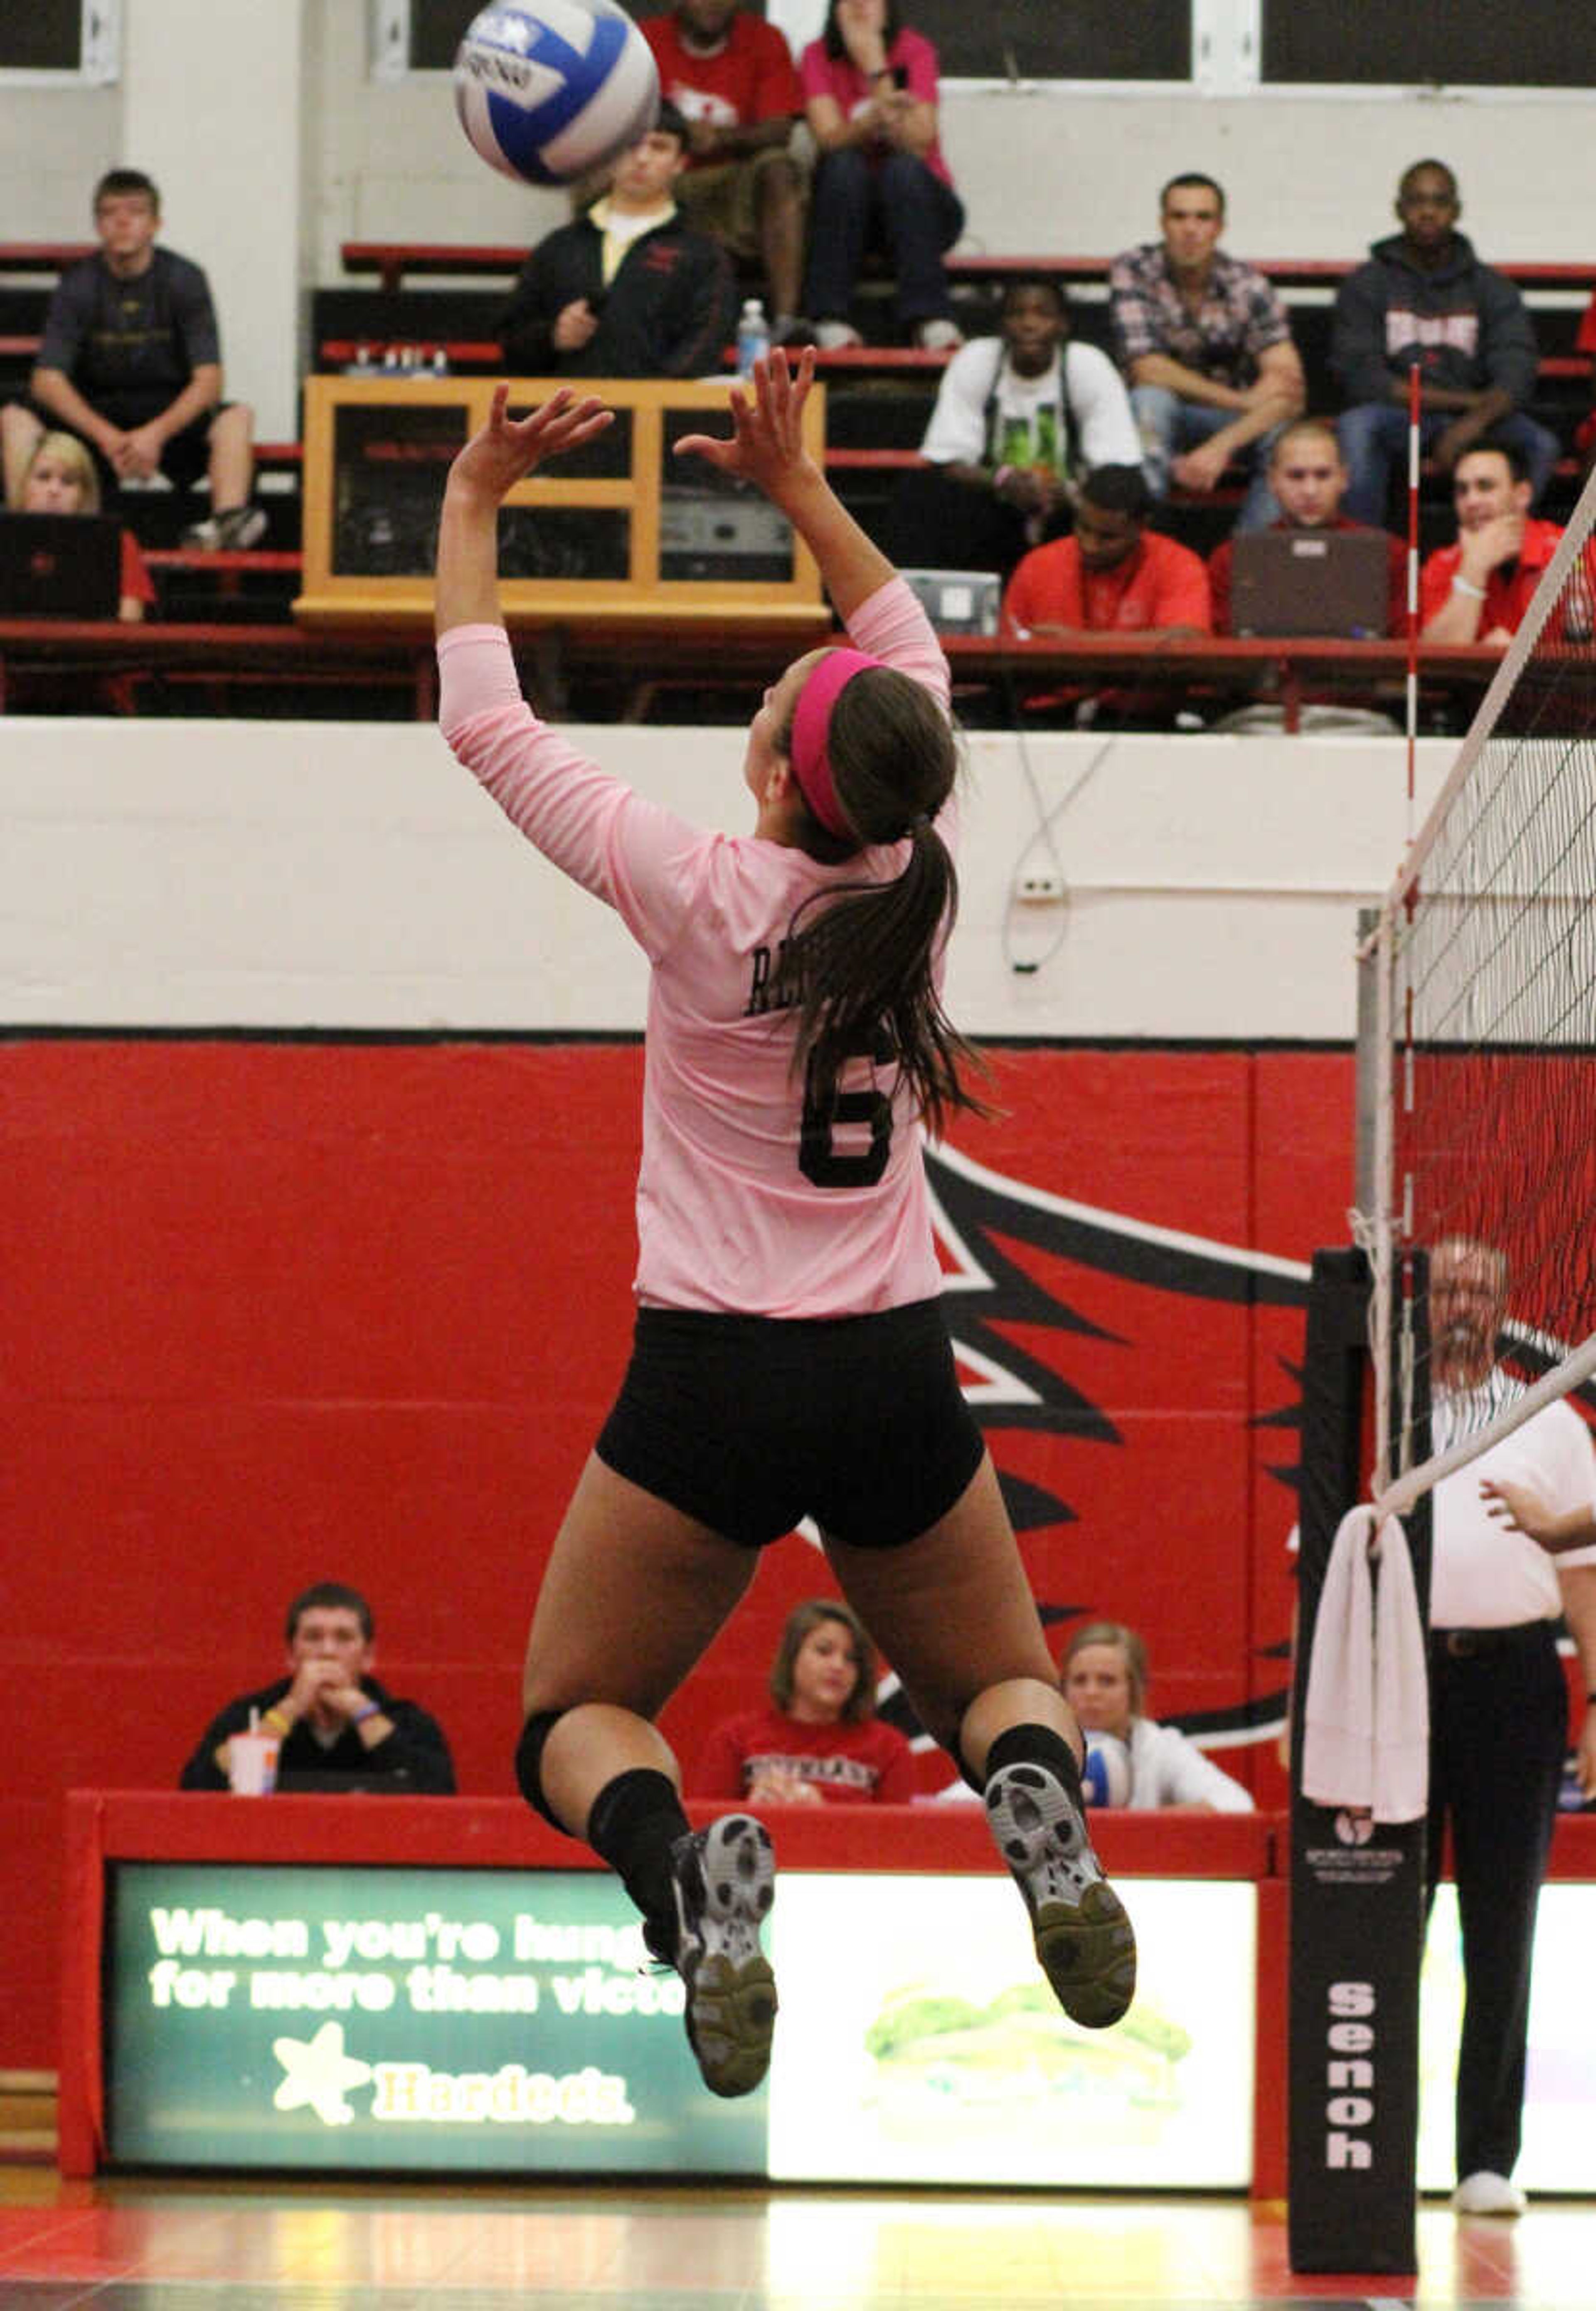 Karlee Lurser, a sophomore on the 2011 team, sets during a Dig for Life game in 2010. - Photos submitted 
by Sports Information.